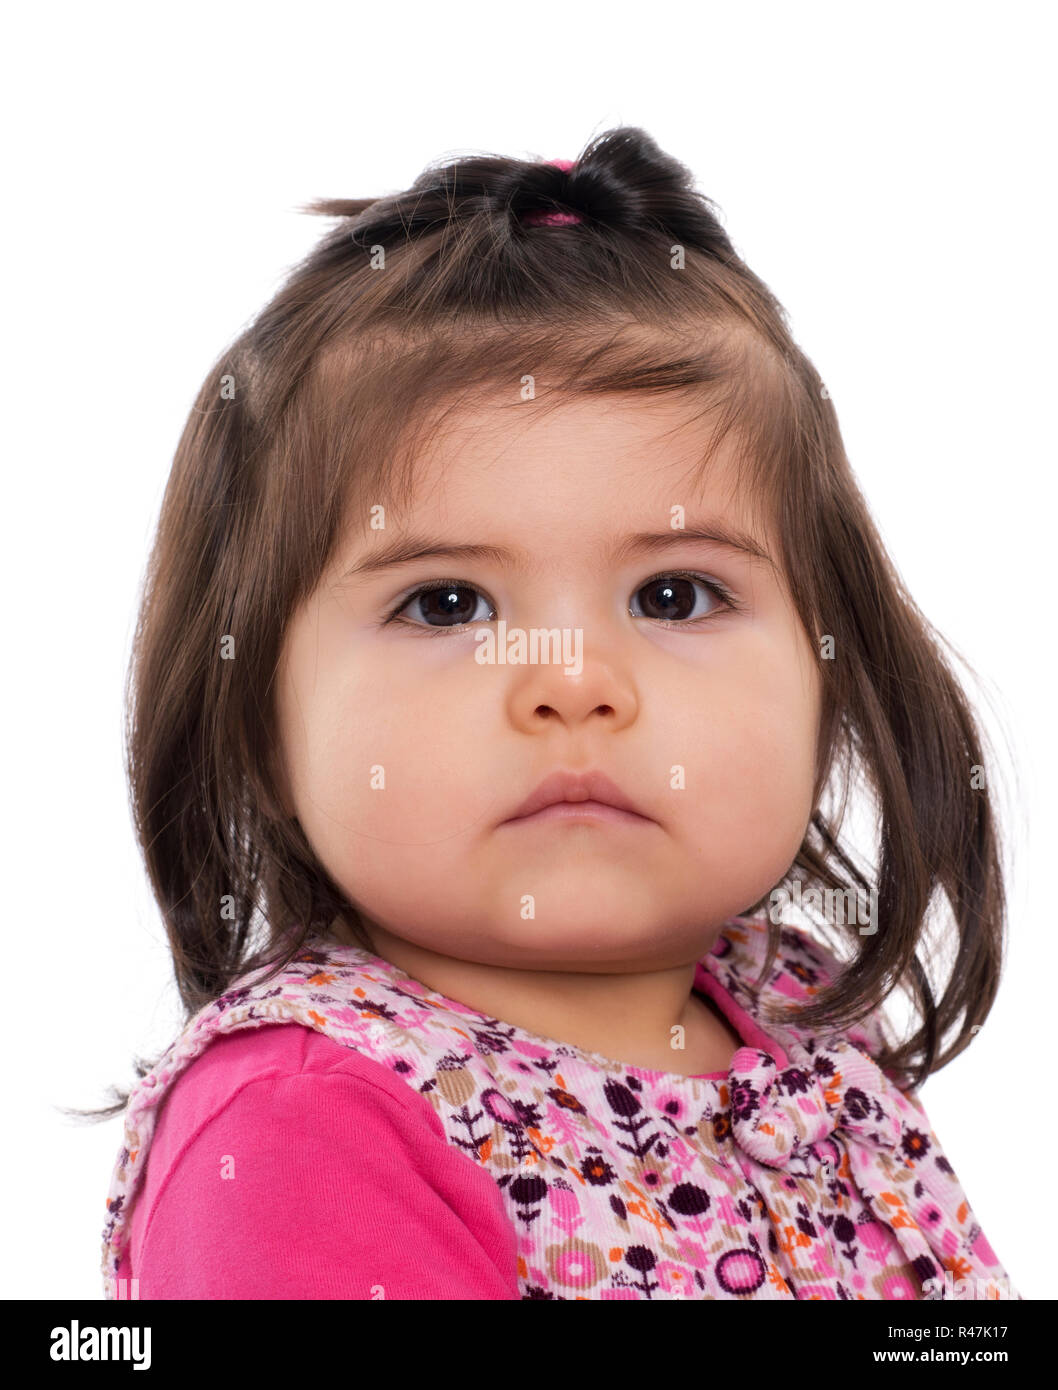 toddler with almond eyes in portrait Stock Photo